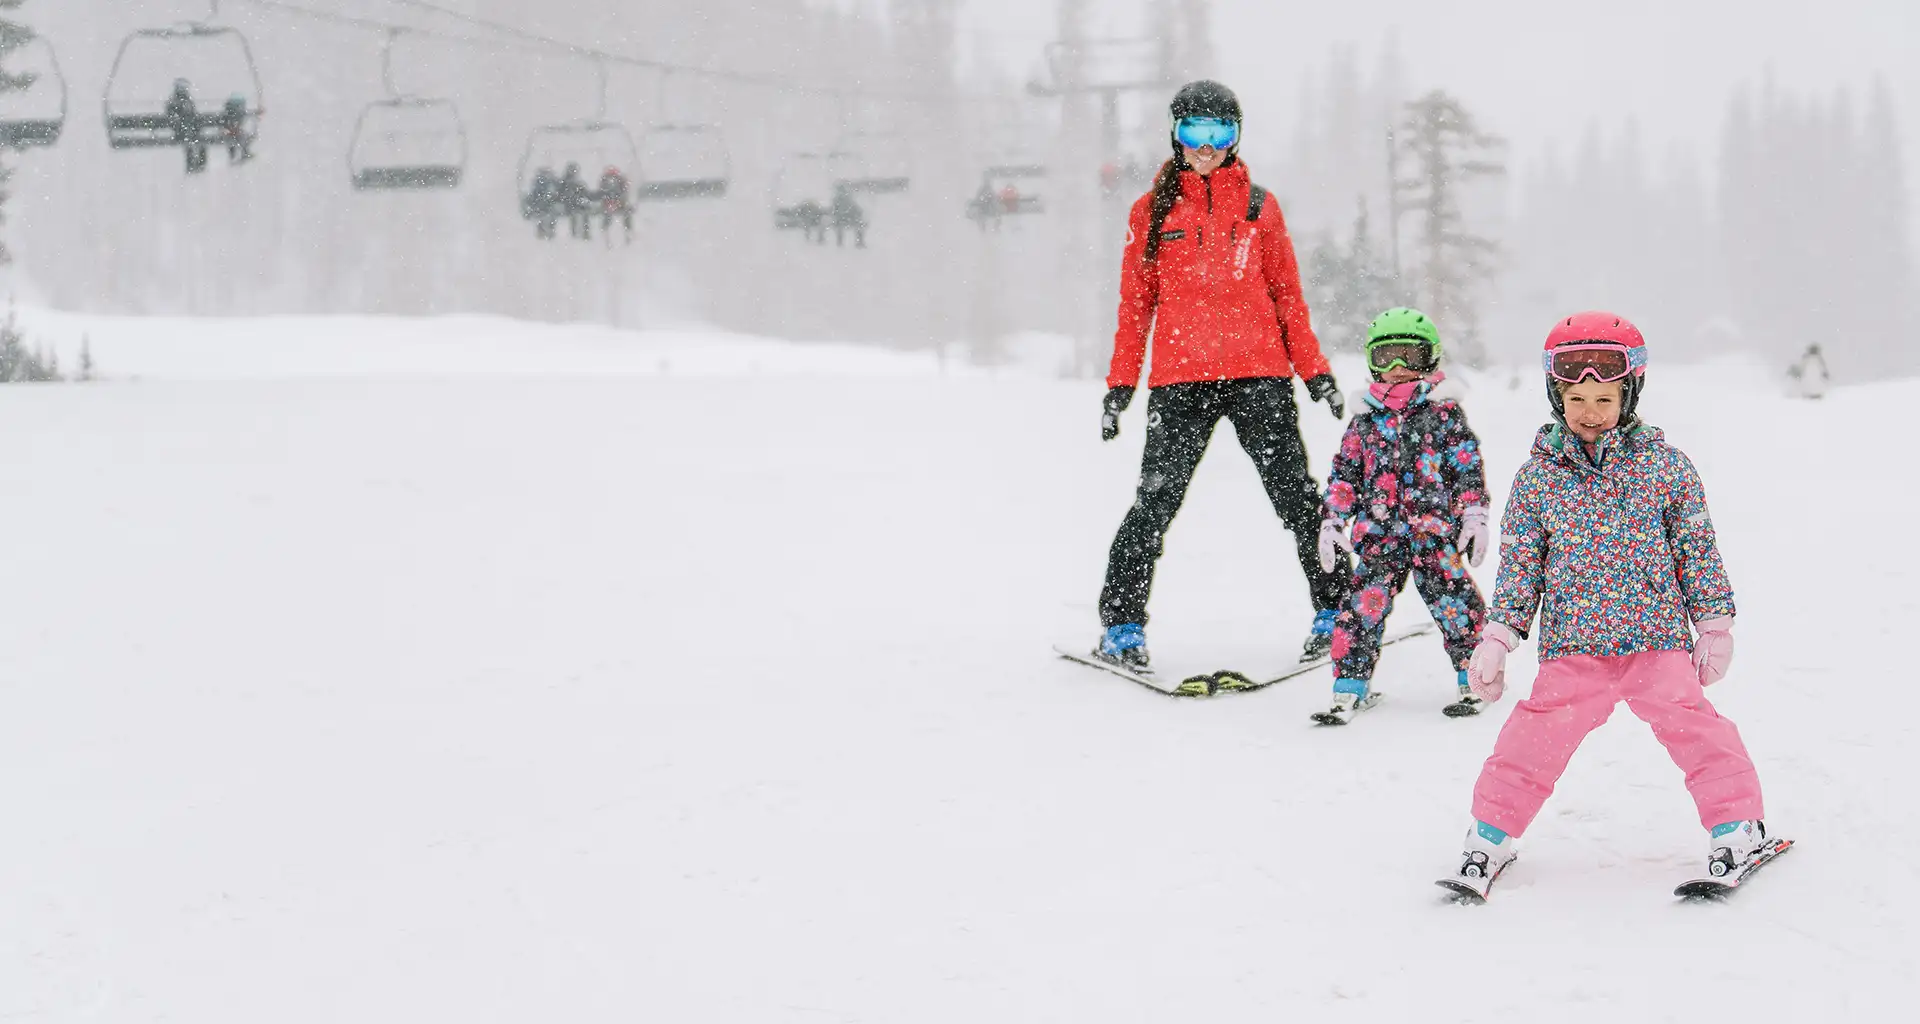 Ski instructor with two kid skiers at Snowmass